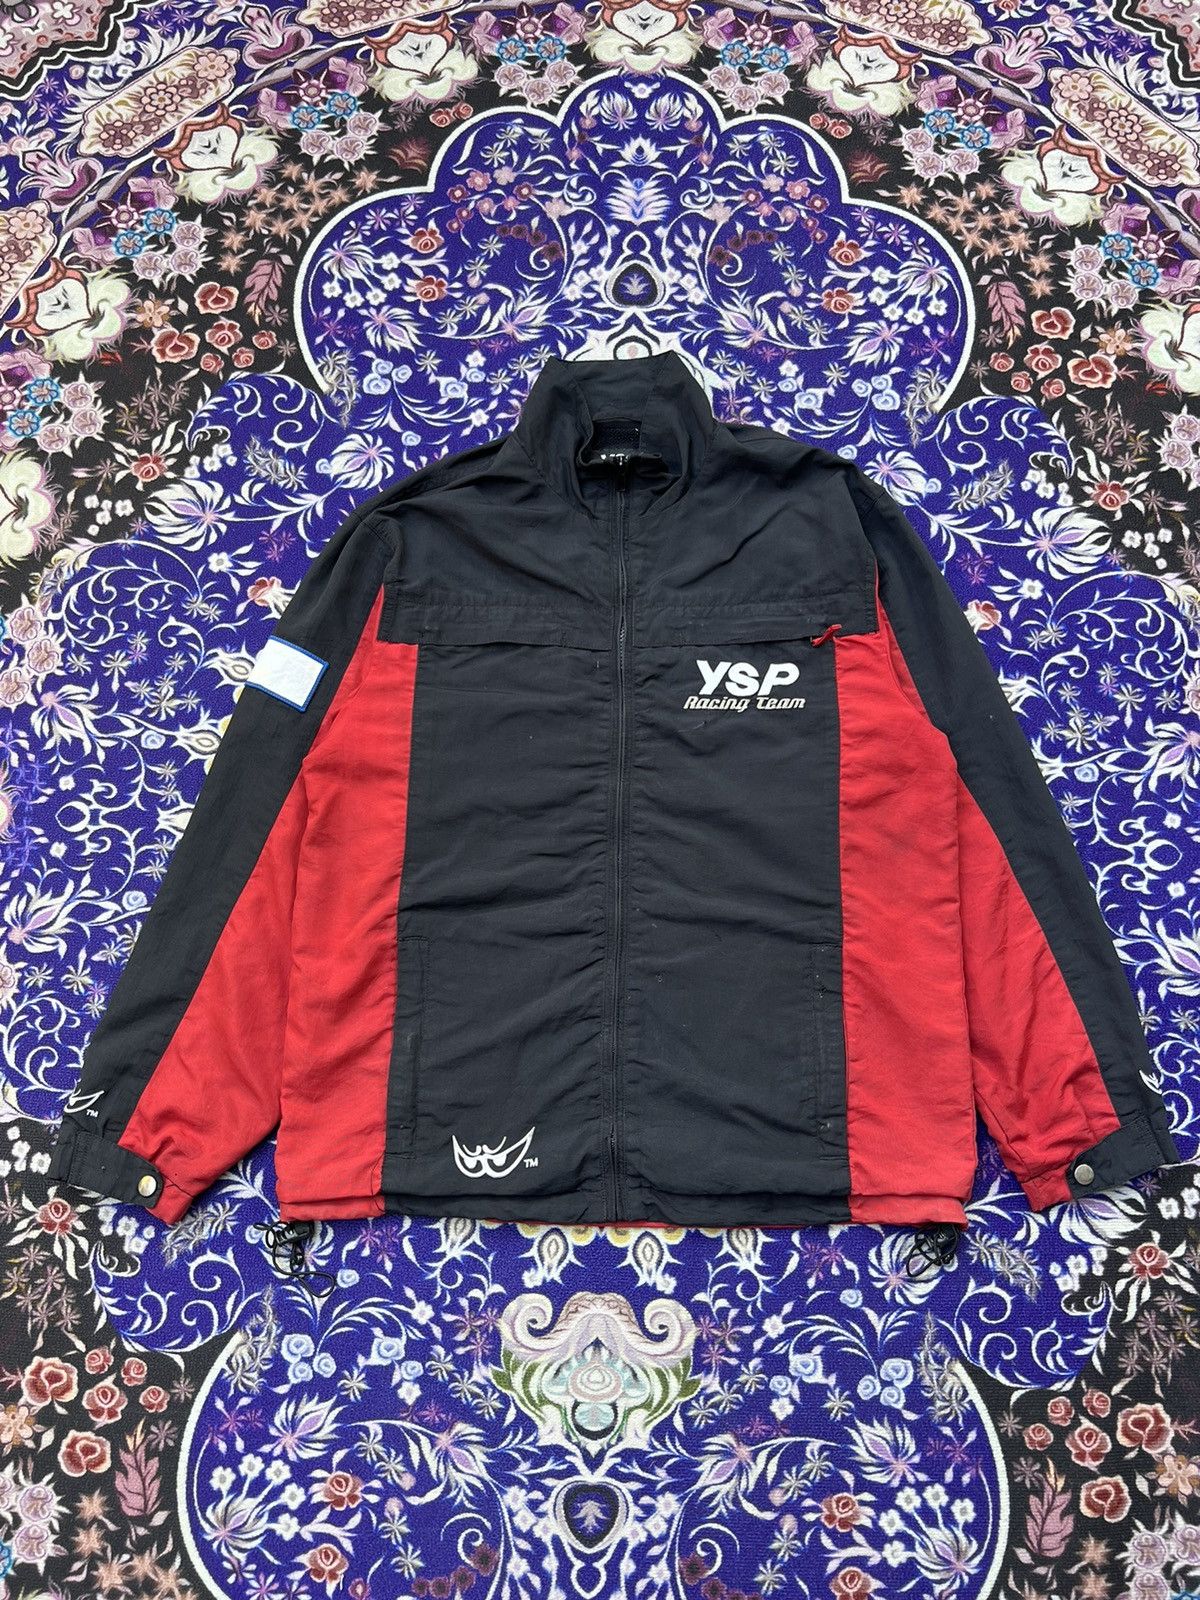 Gear For Sports (M) Vintage Yamaha Racing Team Ysp Jacket | Grailed